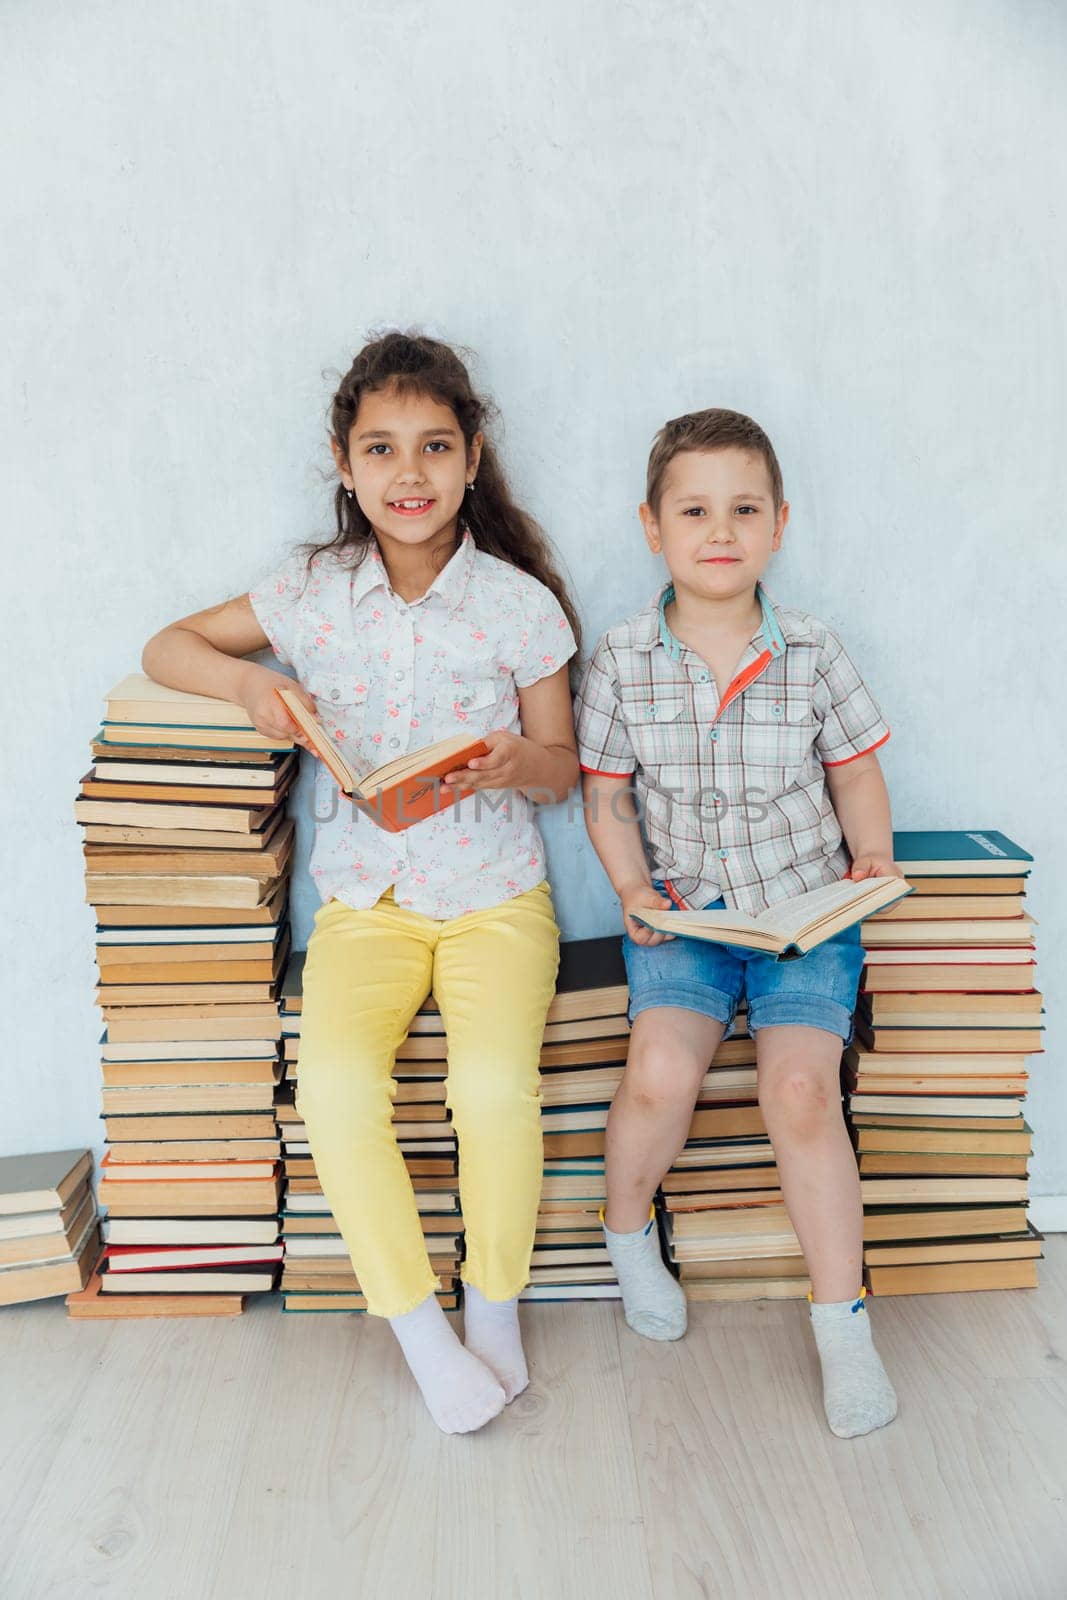 Little boy and girl sitting on stacks of books